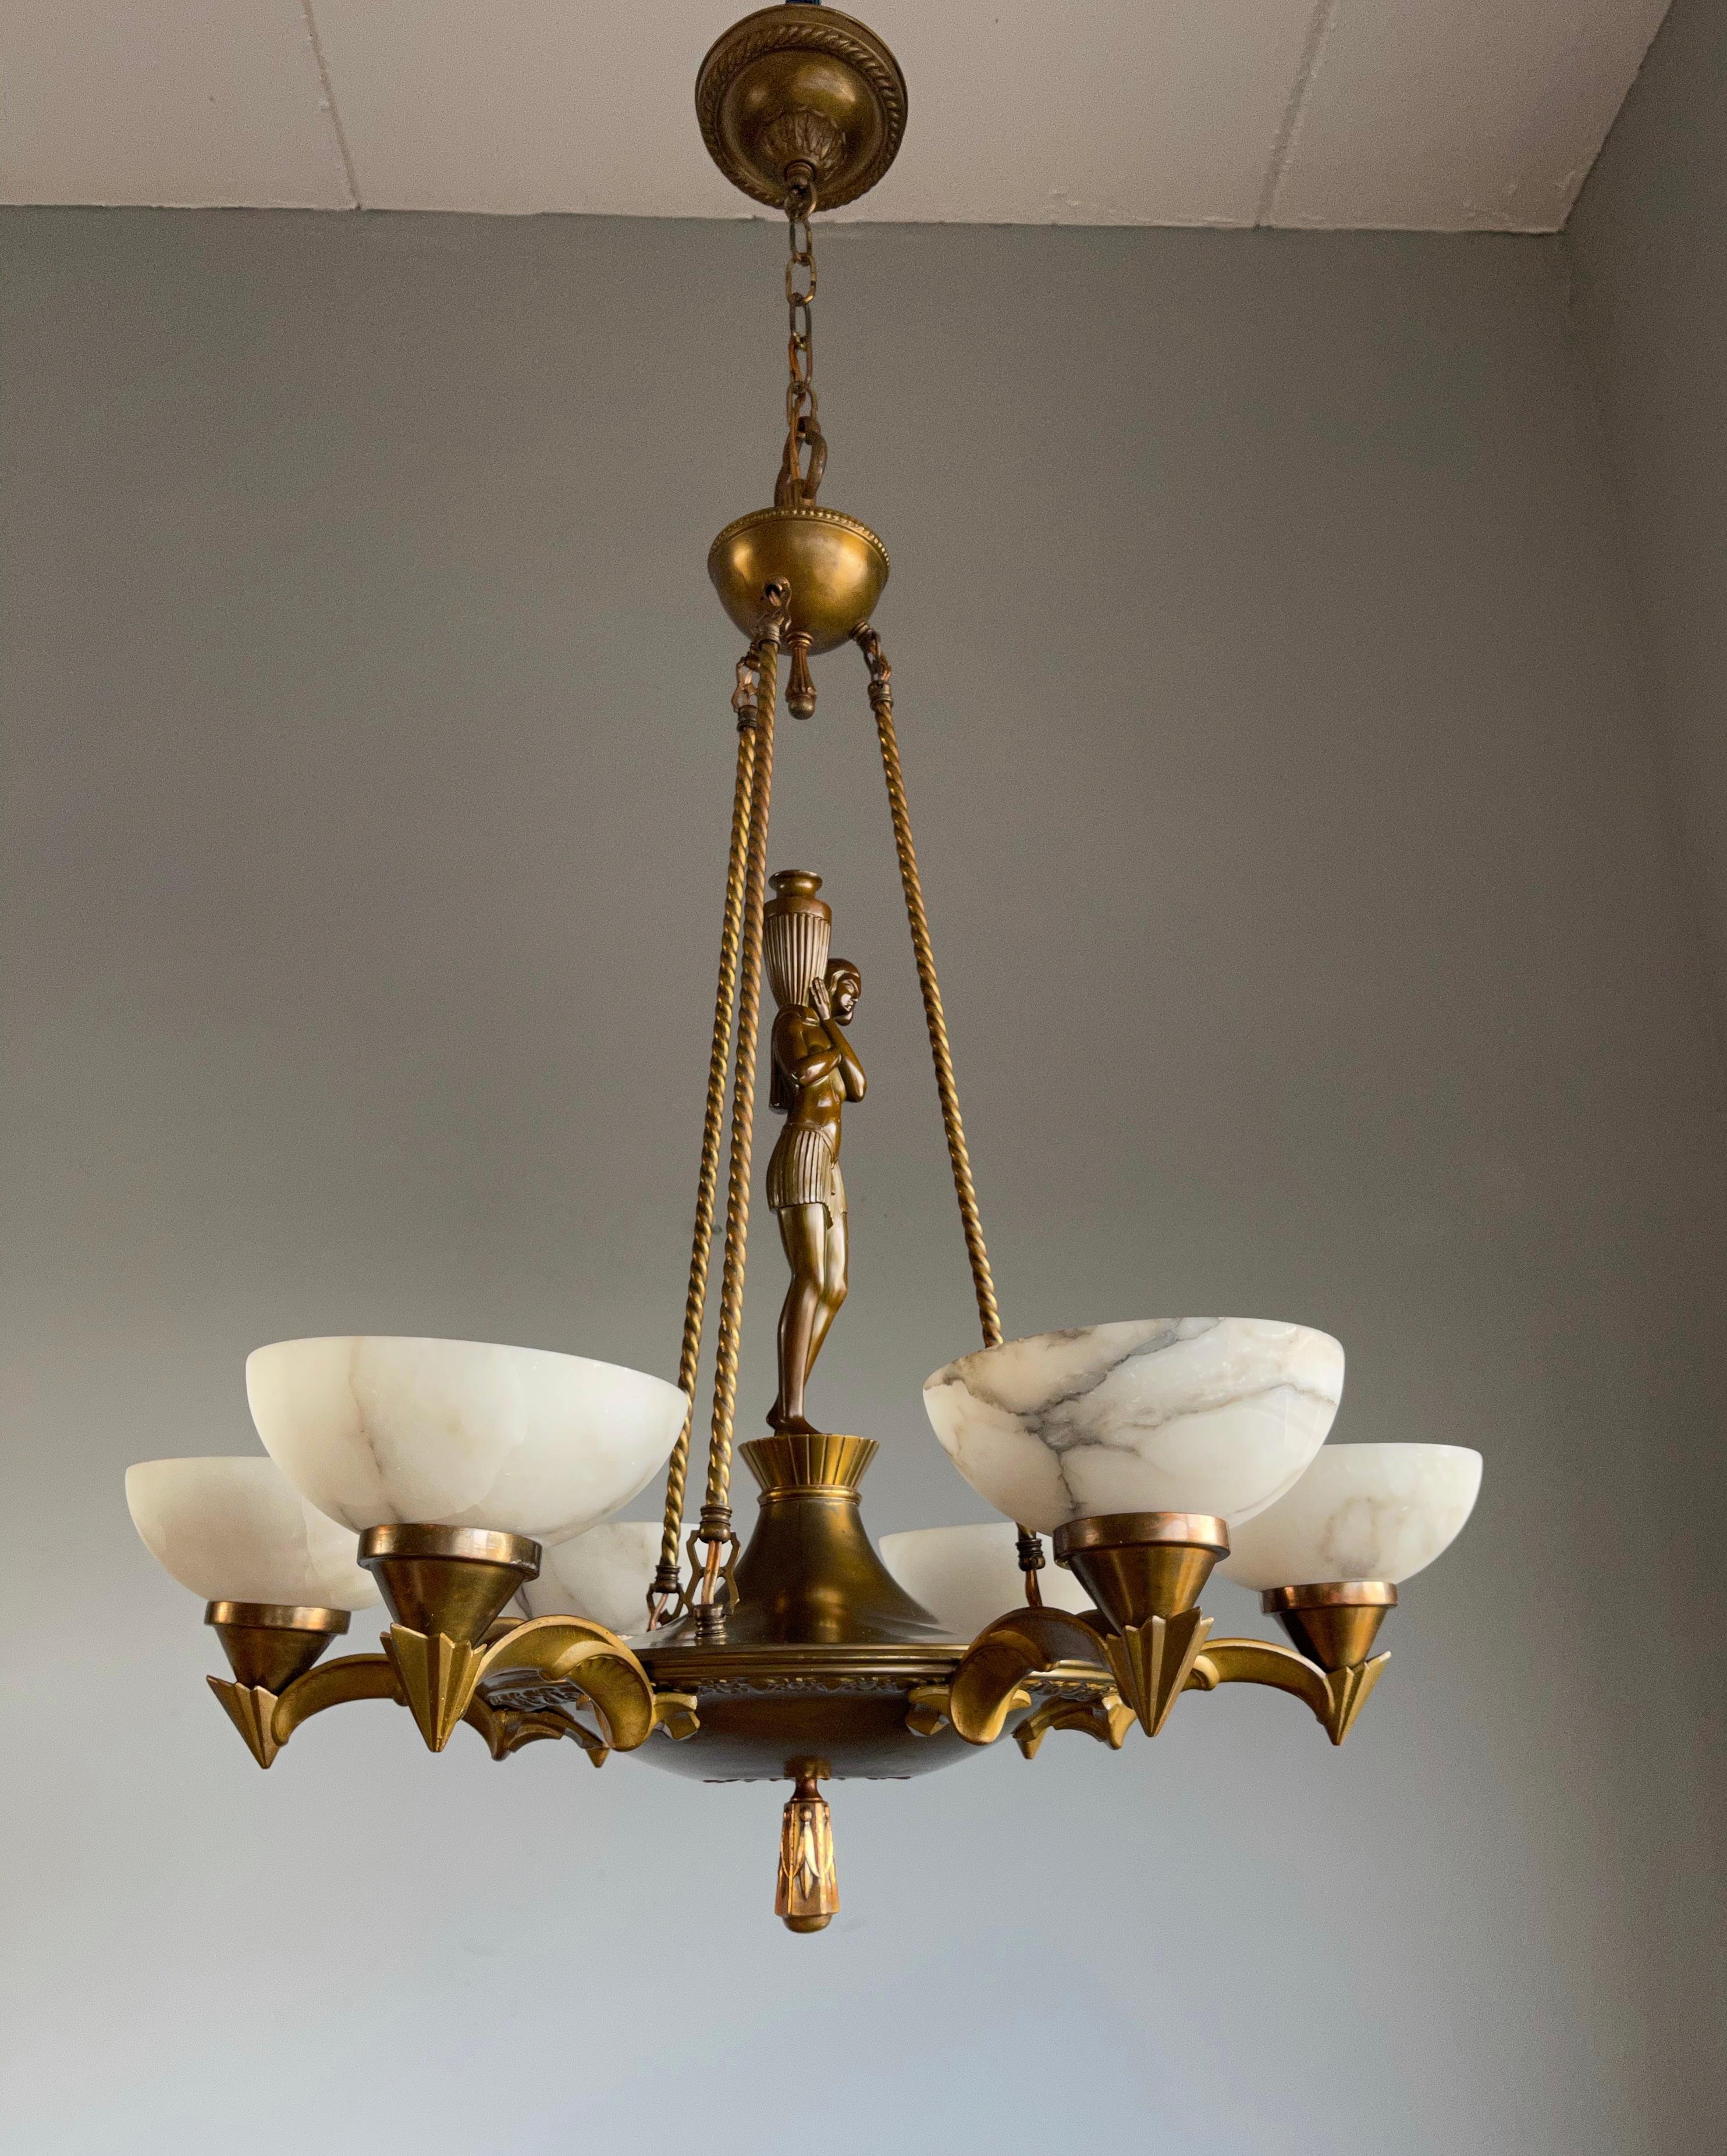 Beautiful Art Deco pendant light with a bronze sculpture (probably of Dione, goddess of water).

If you are looking for a truly stylish and top quality made antique light fixture to grace your dining room or kitchen then this handcrafted pendant